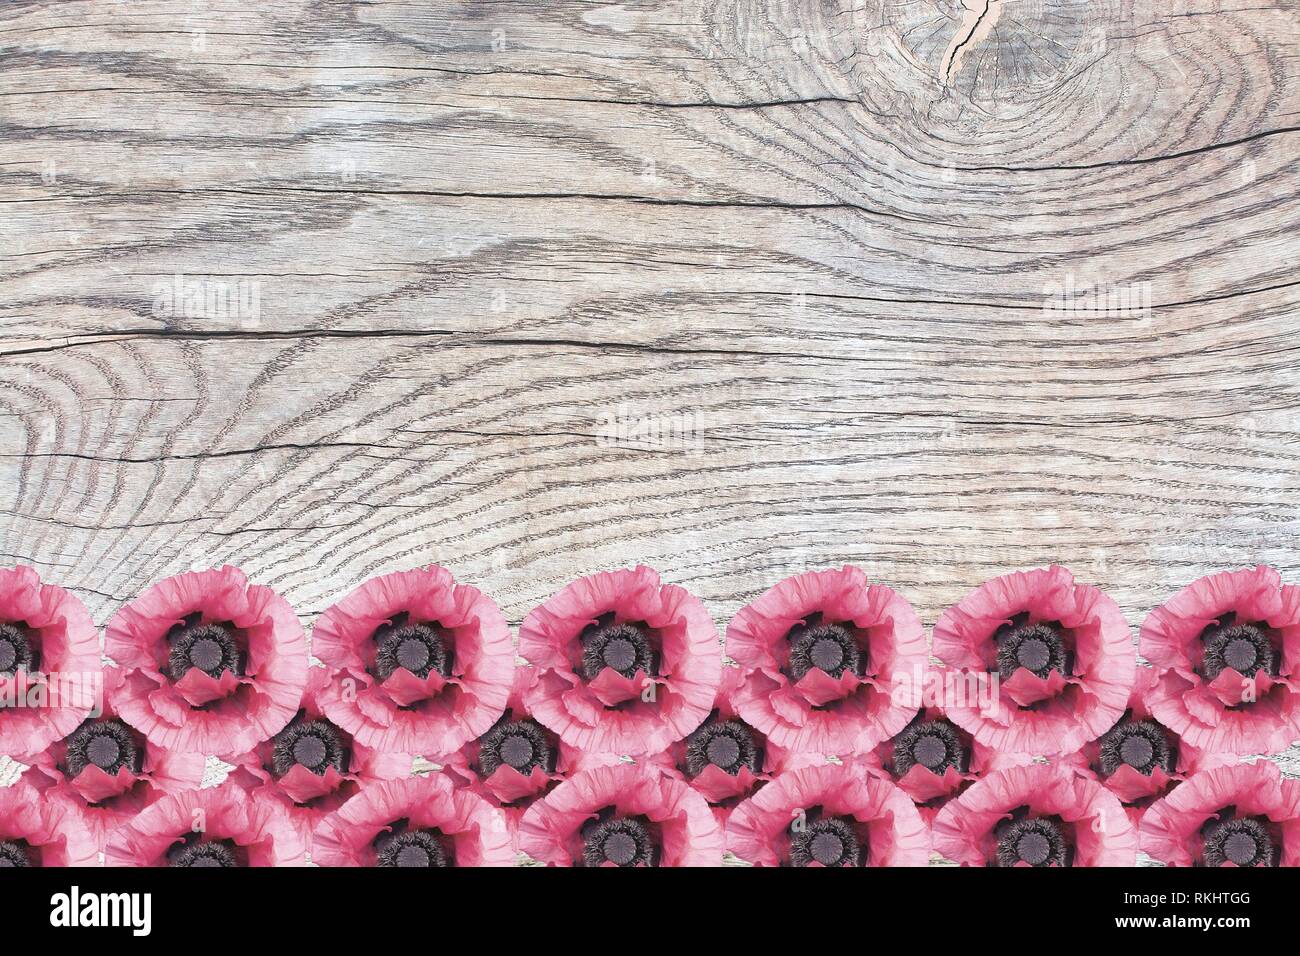 Pink poppies on wood surface with patina, organic texture background copy space. Stock Photo